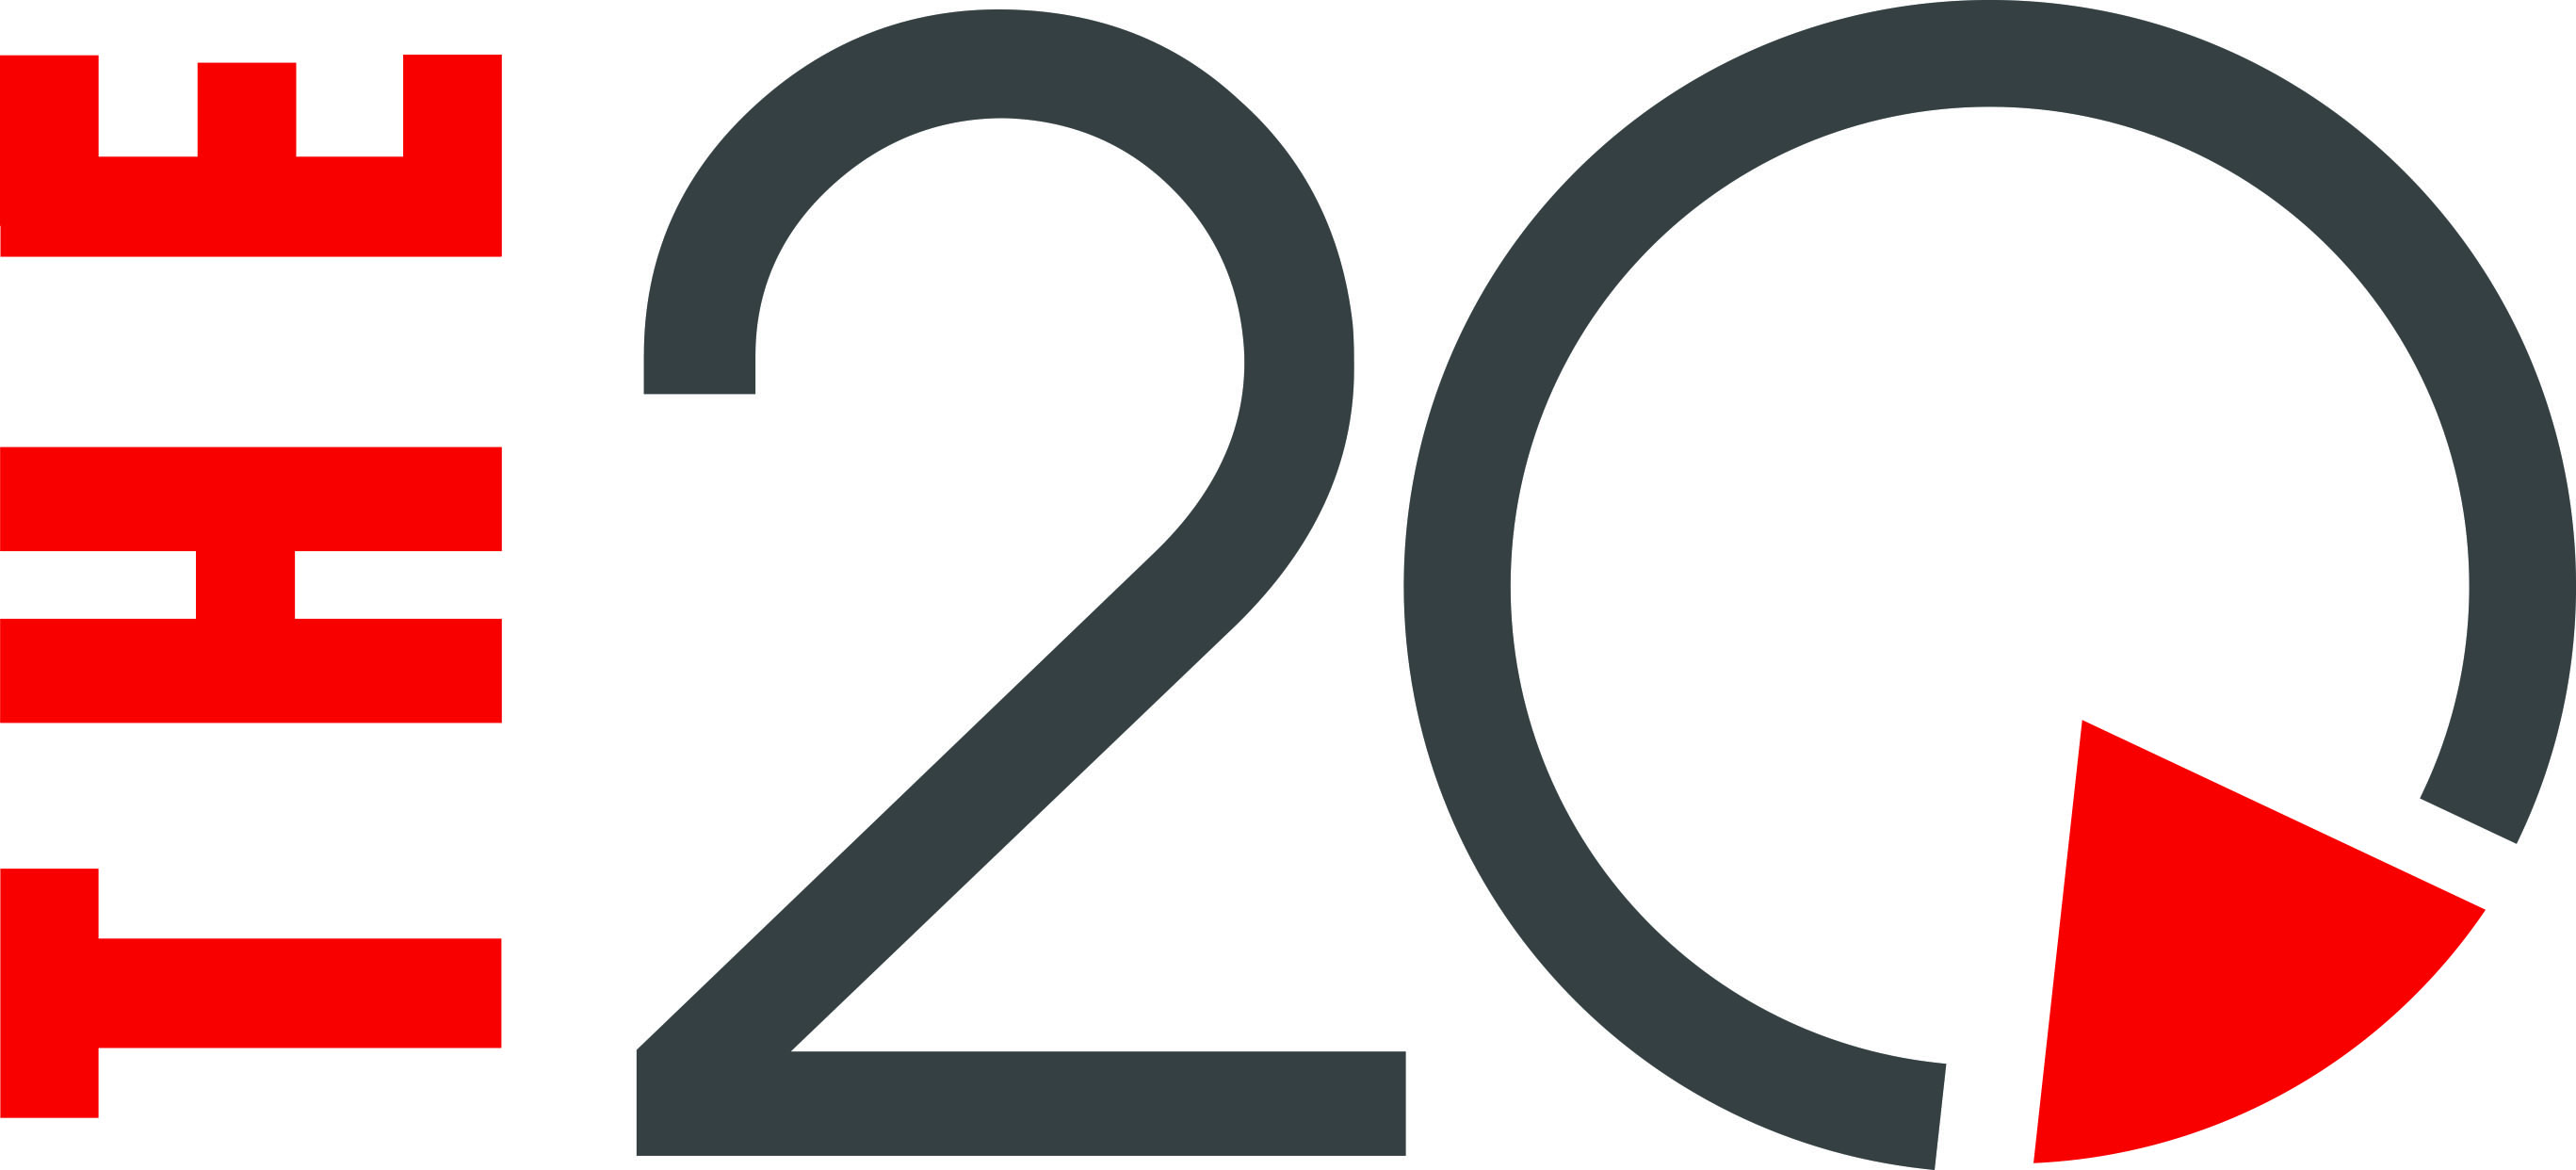 The 20